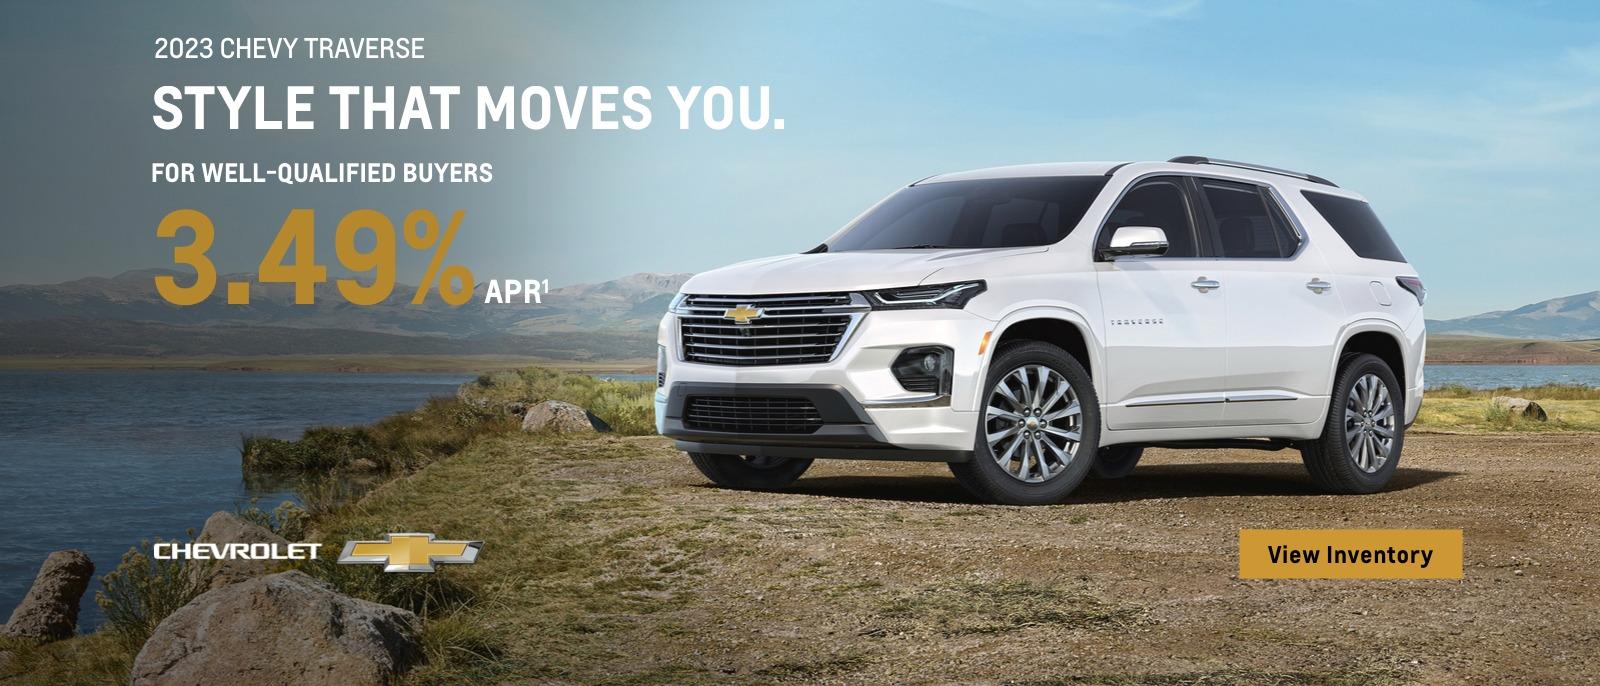 2023 Chevy Traverse. For well-qualified buyers 3.49% APR